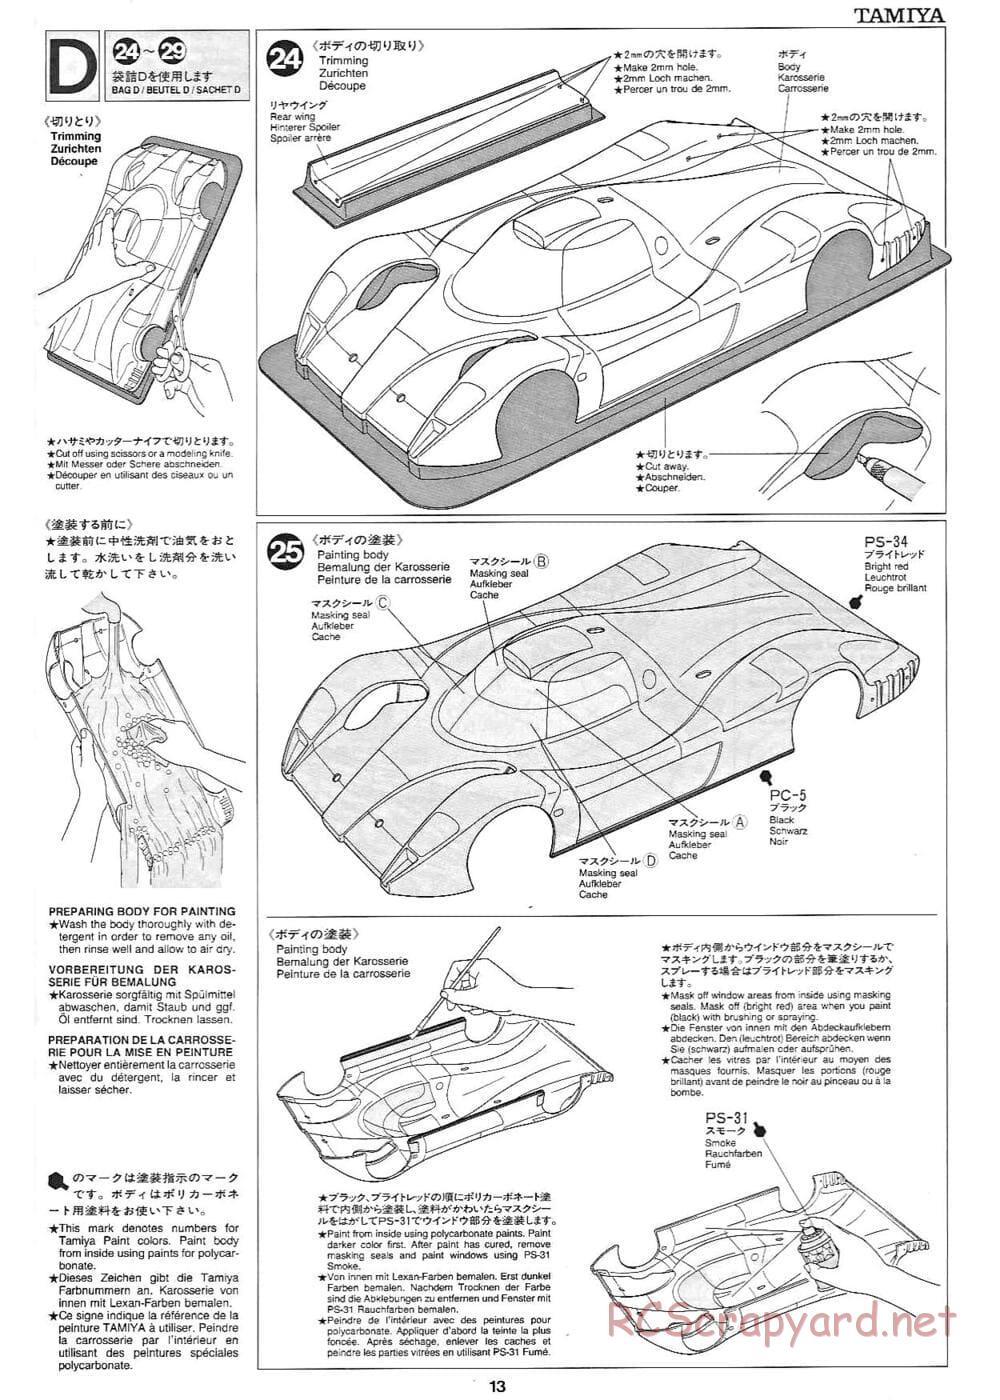 Tamiya - Toyota GT-One TS020 - F103RS Chassis - Manual - Page 13